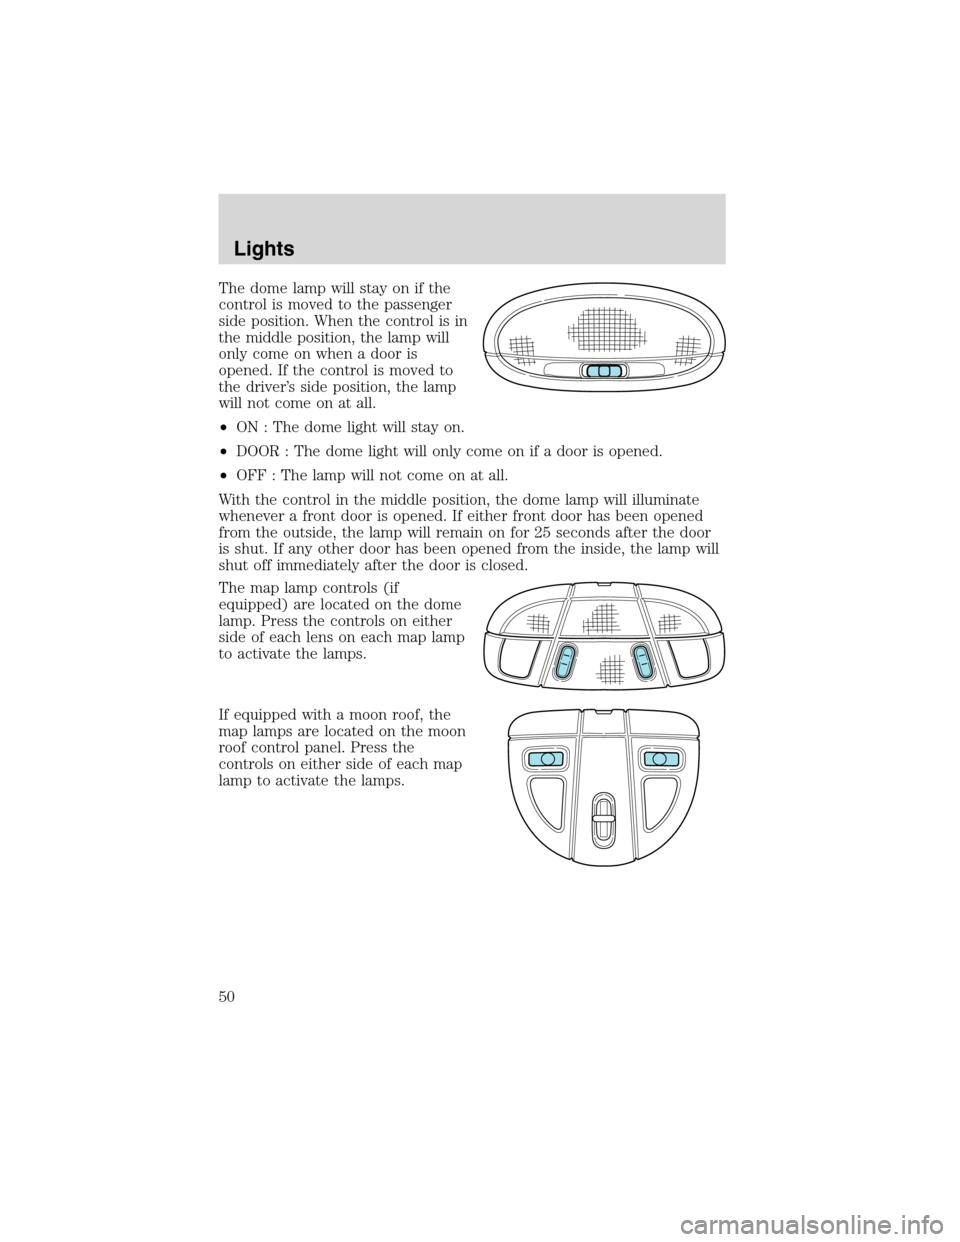 Mercury Sable 2002  Owners Manuals The dome lamp will stay on if the
control is moved to the passenger
side position. When the control is in
the middle position, the lamp will
only come on when a door is
opened. If the control is moved